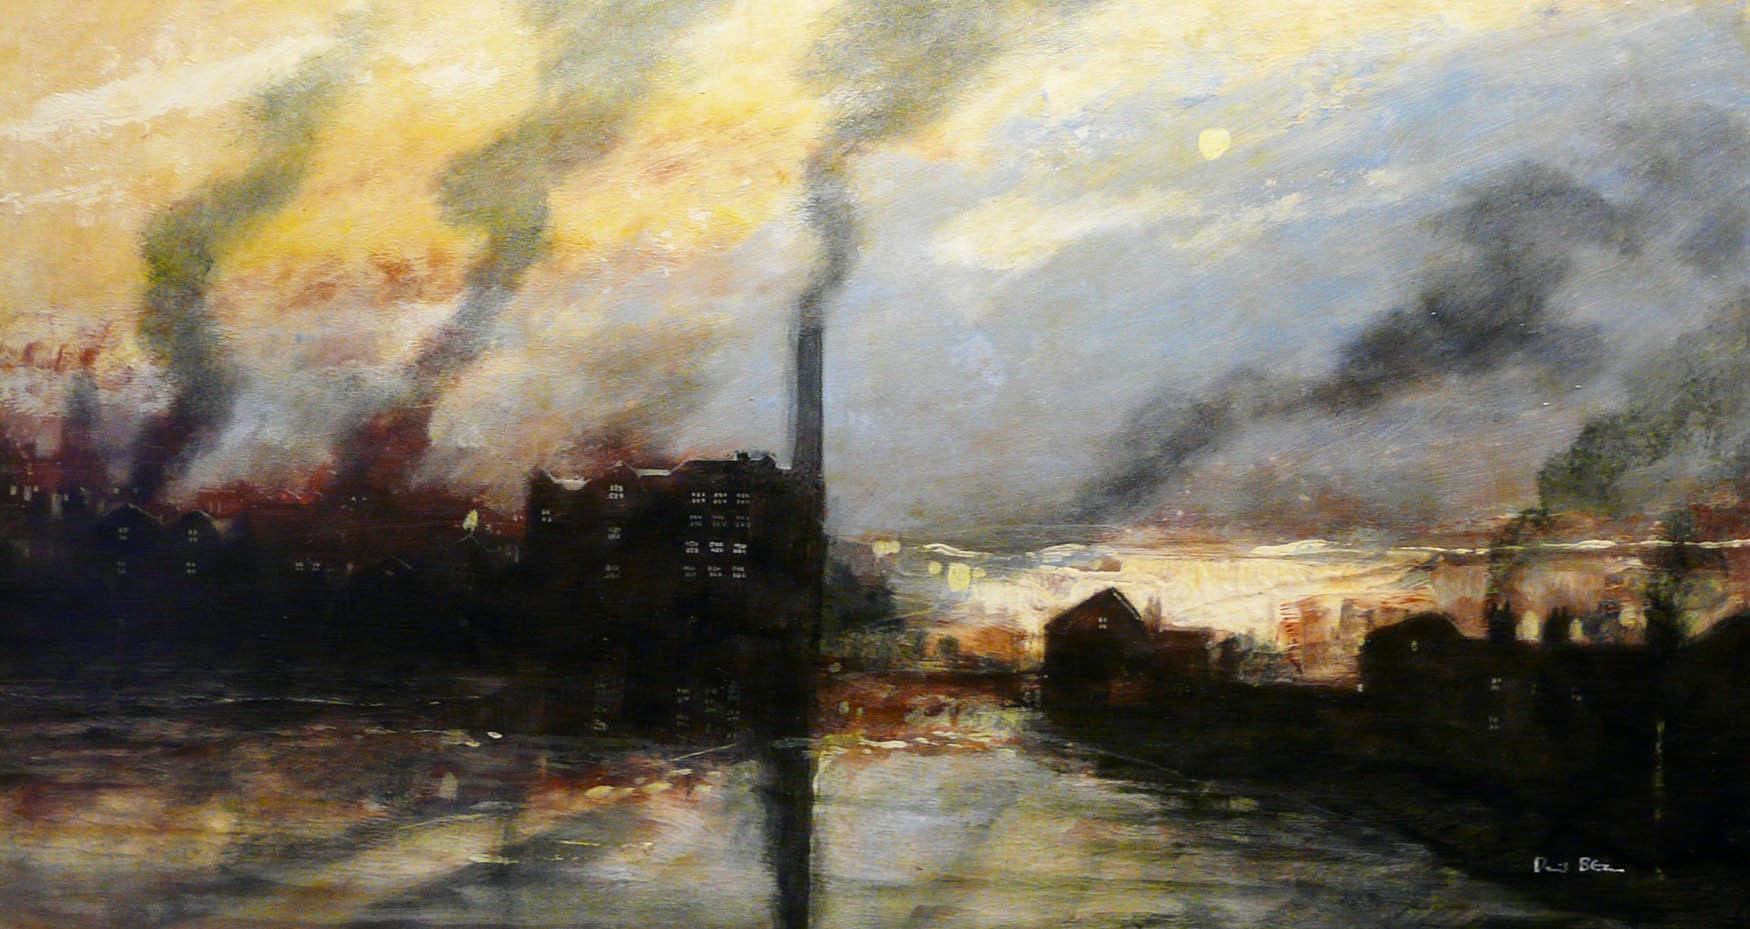 Reflections of the Mill by David Bez